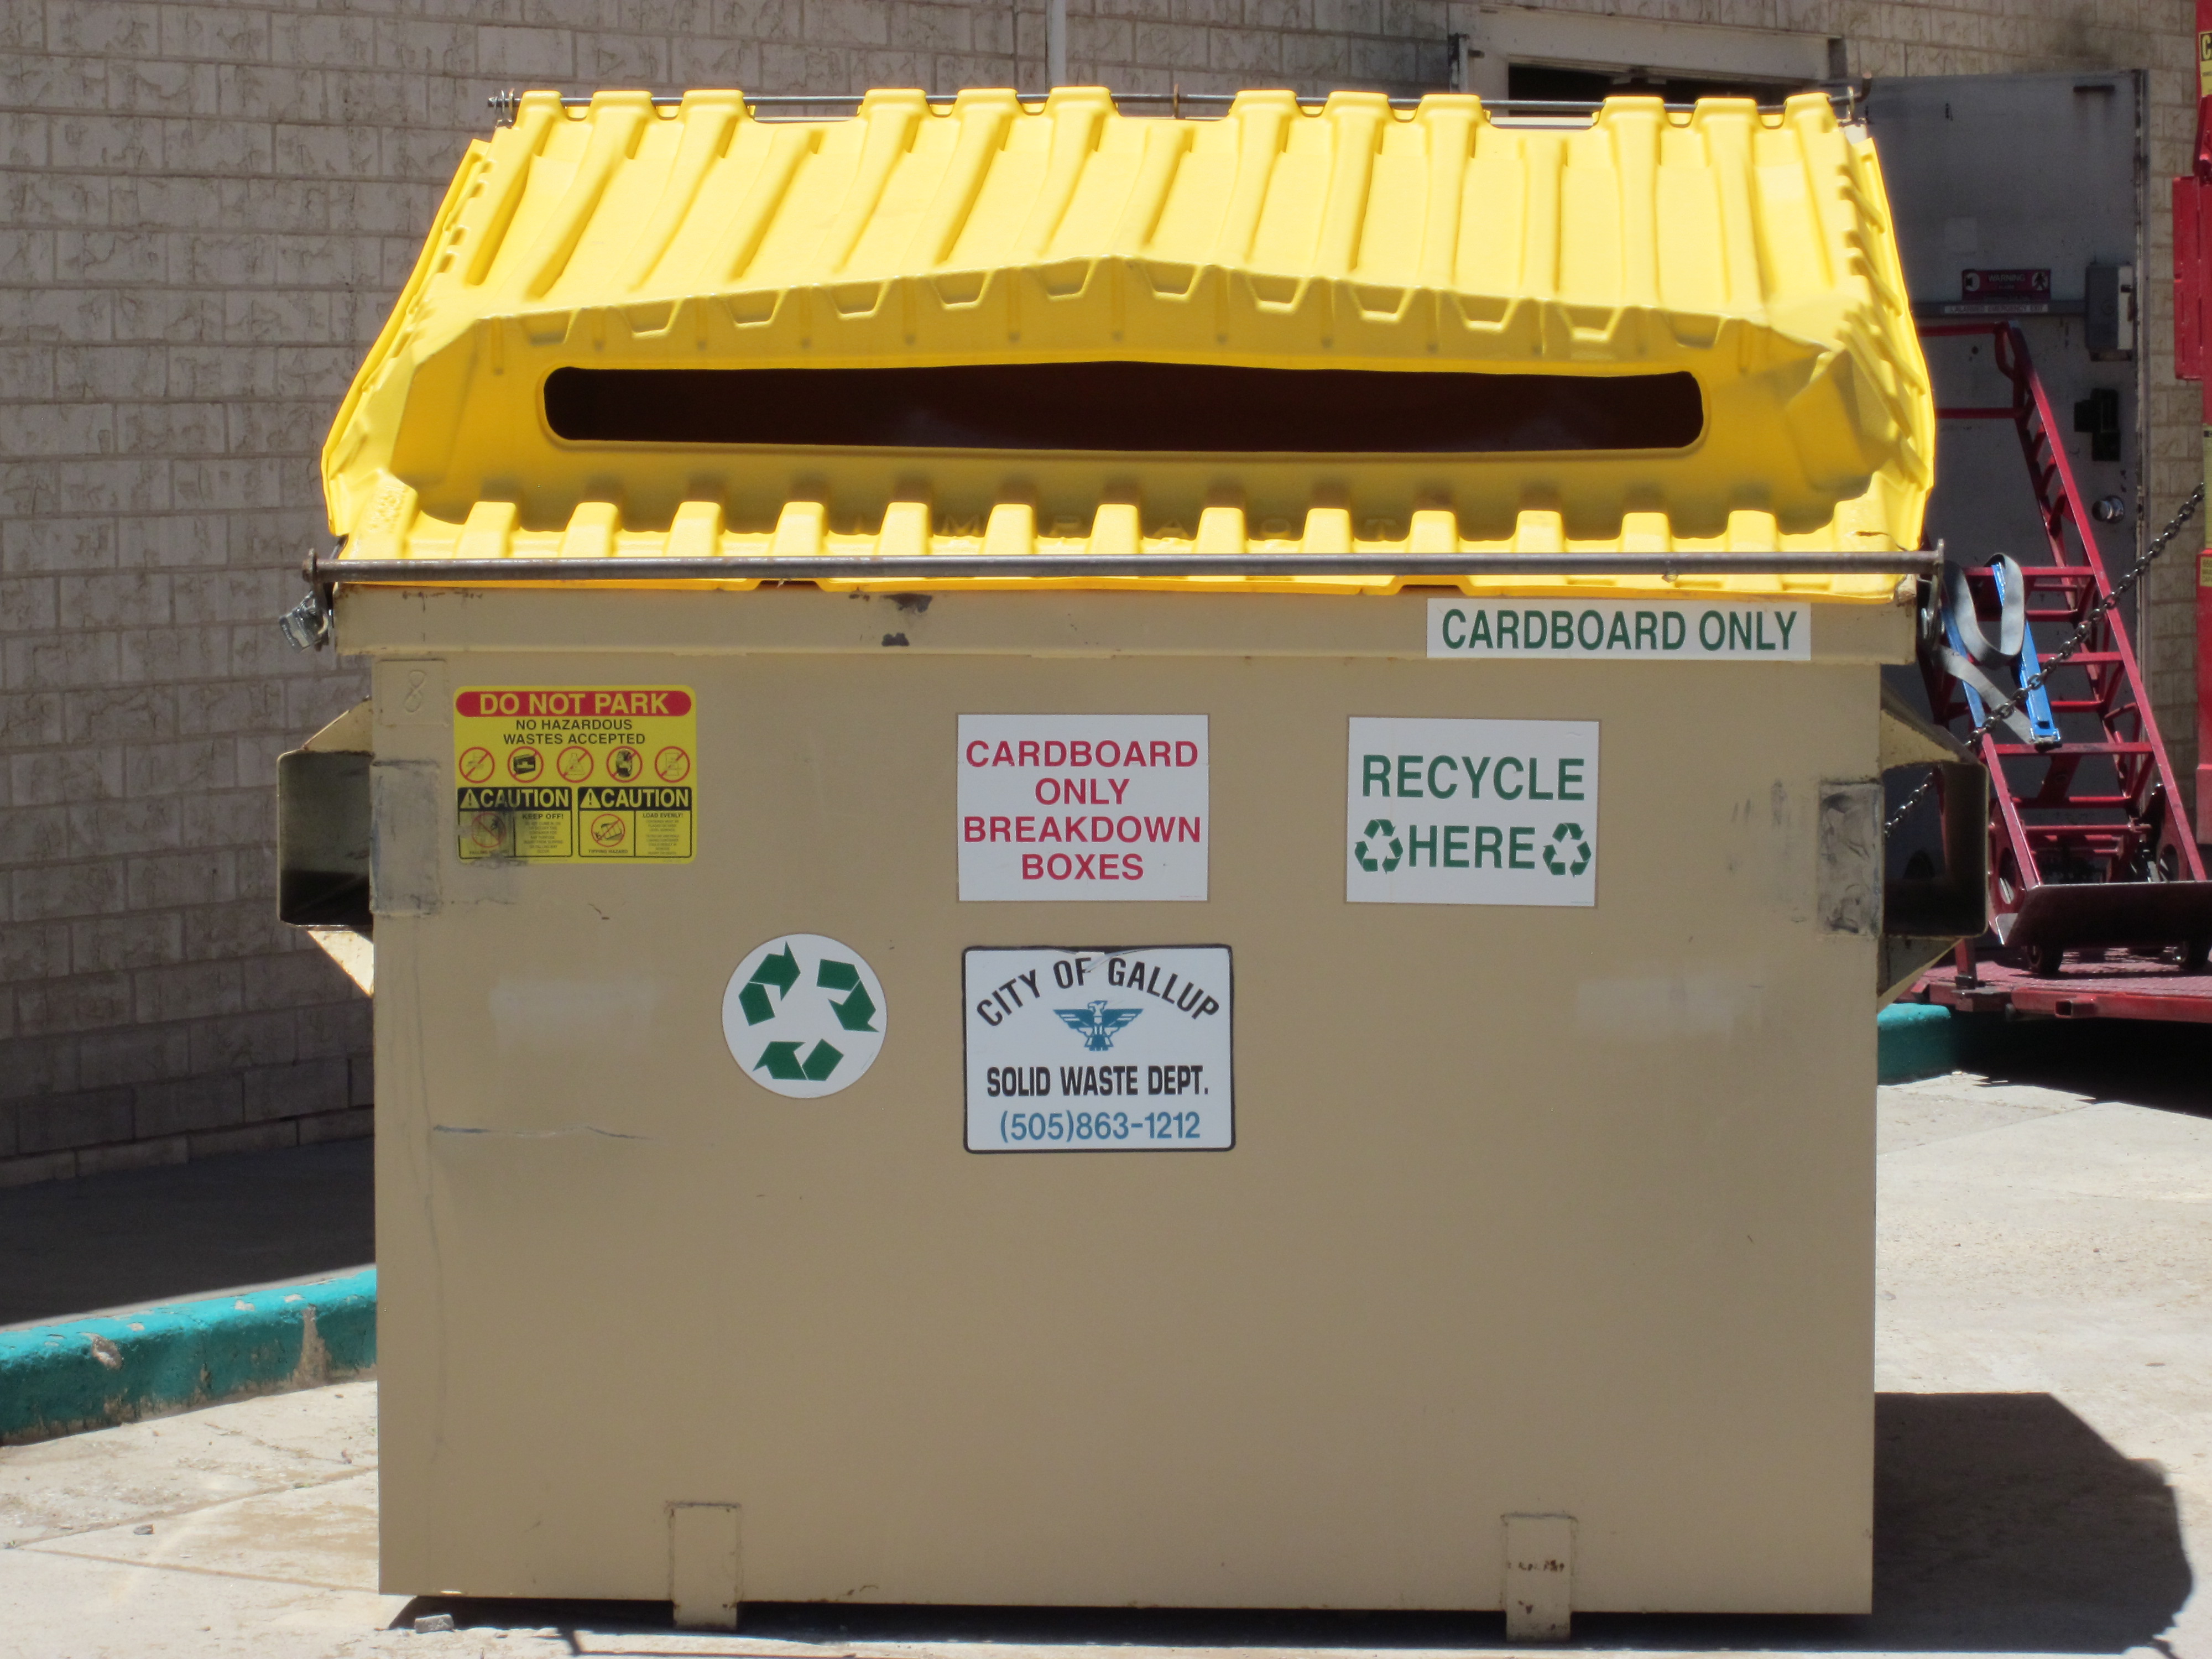 McKinley Citizens' Recycling Council